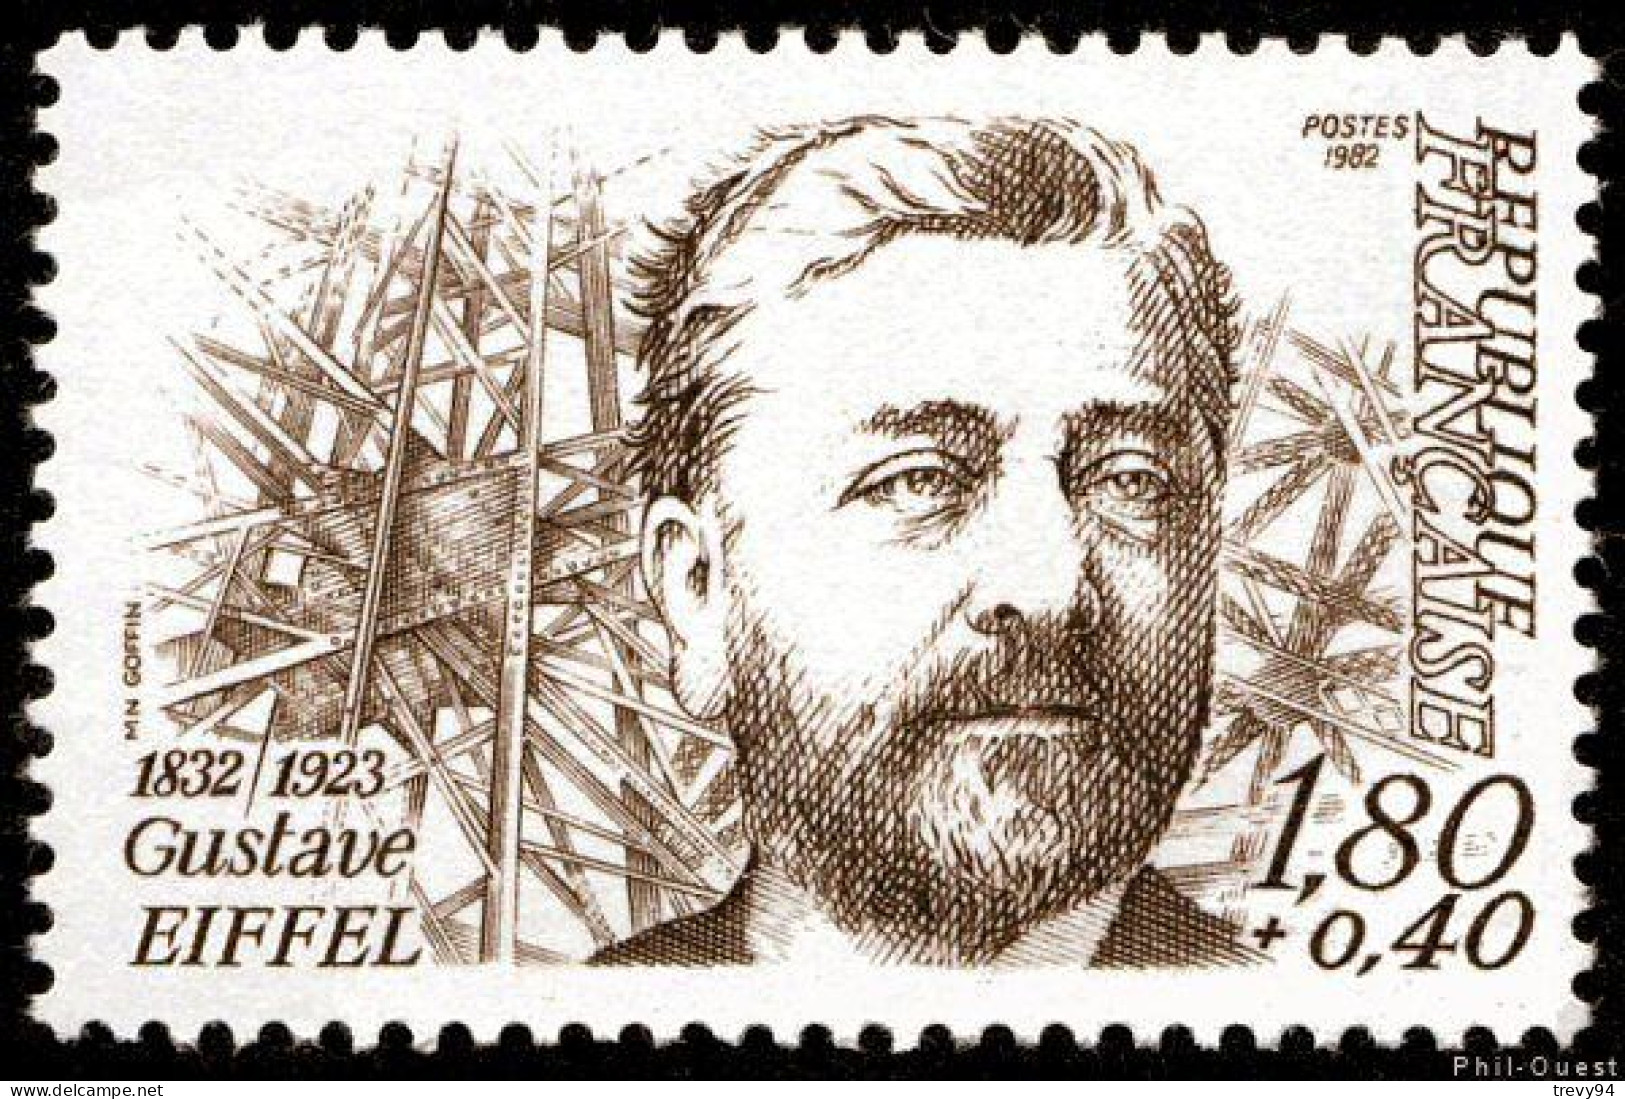 Timbre De 1979 - Gustave Eiffel 1832-1923 - N° 2230 Neuf - Unused Stamps